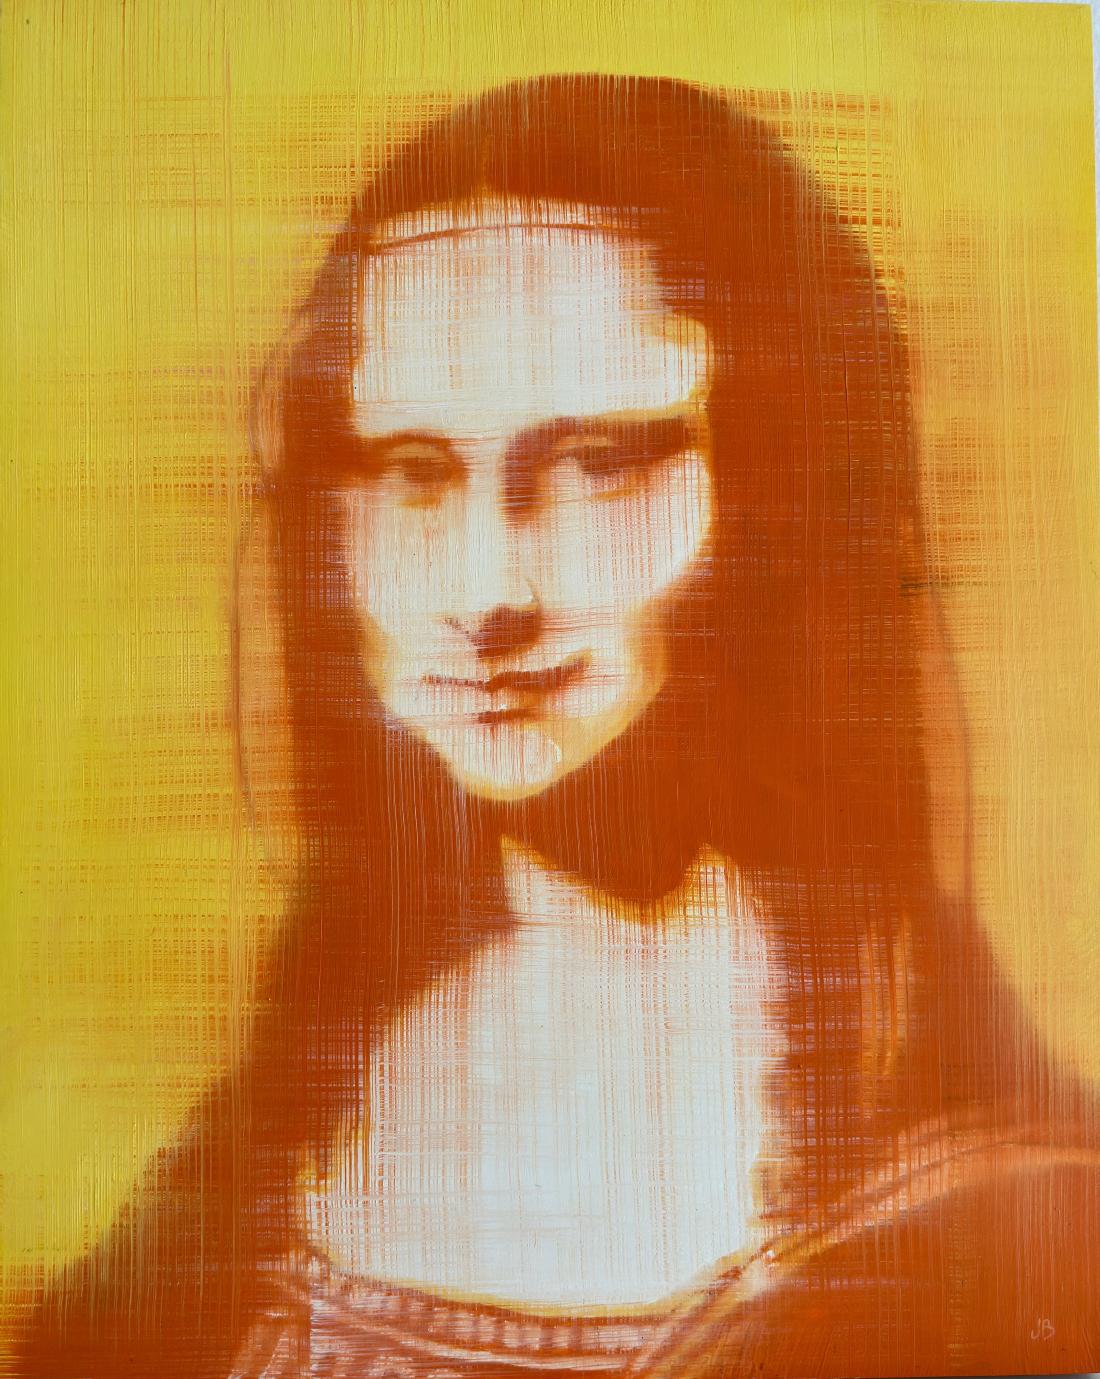 LOOK FOR FREE SHIPPING AT CHECKOUT.

ARTIST EXPLANATION OF THE PAINTINGS:
Mona Lisa Orange  measures  20 x 16